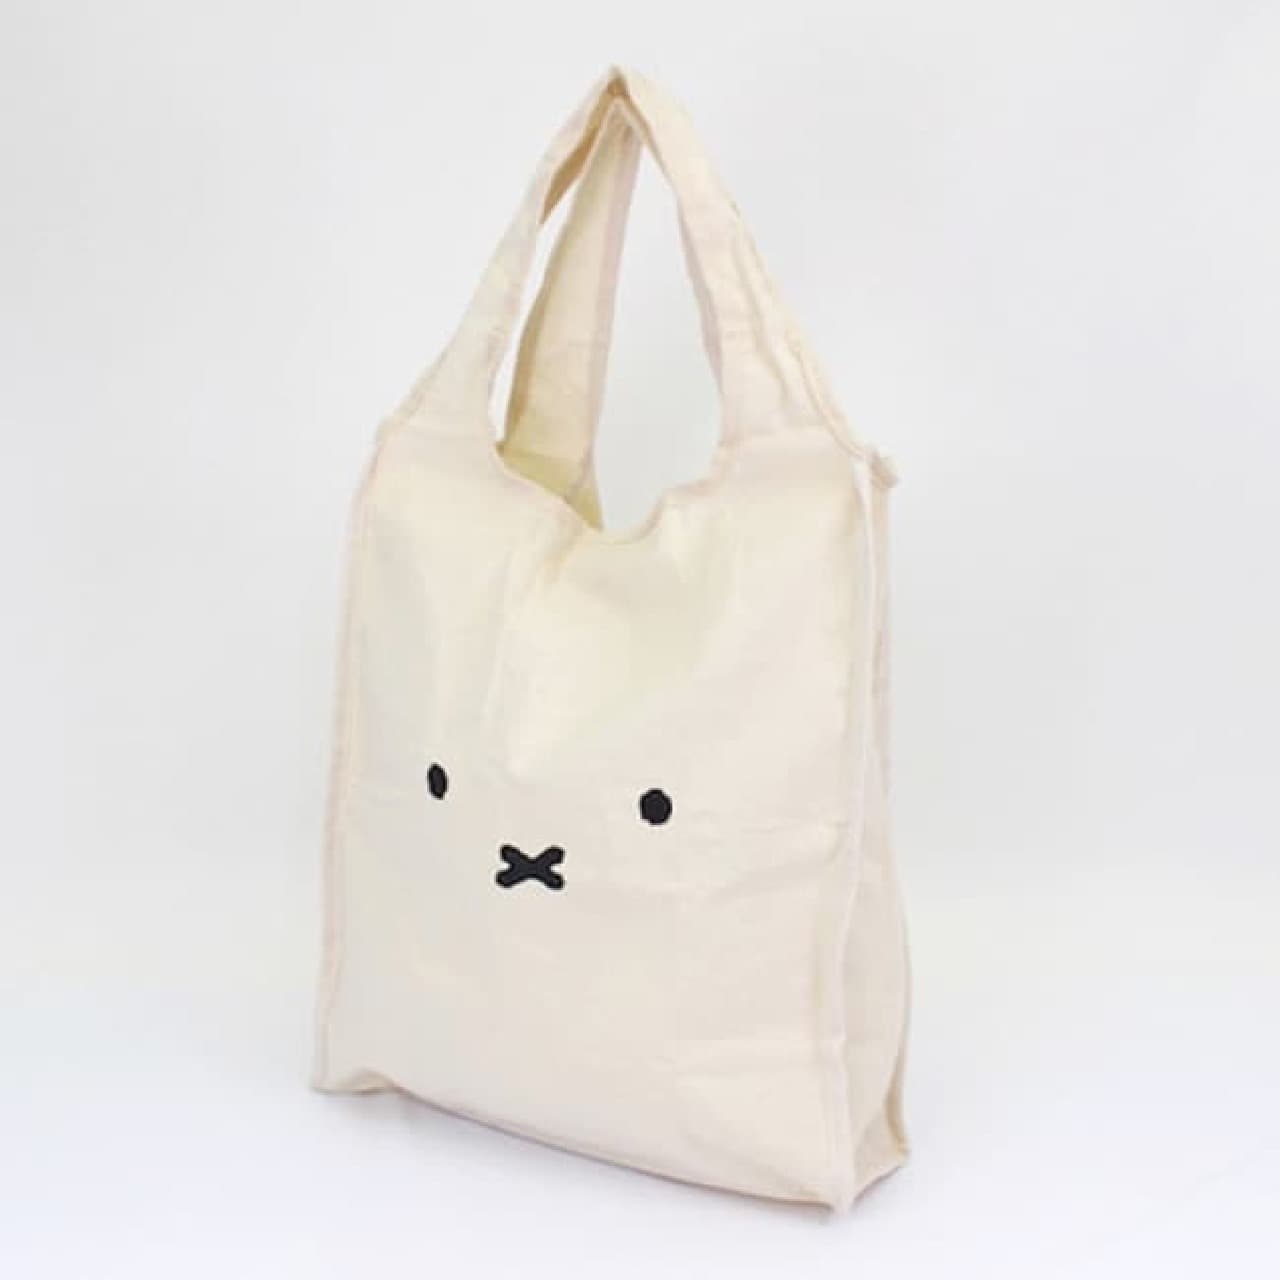 Miffy's folding canvas tote for Villevan-also useful for eco-bags